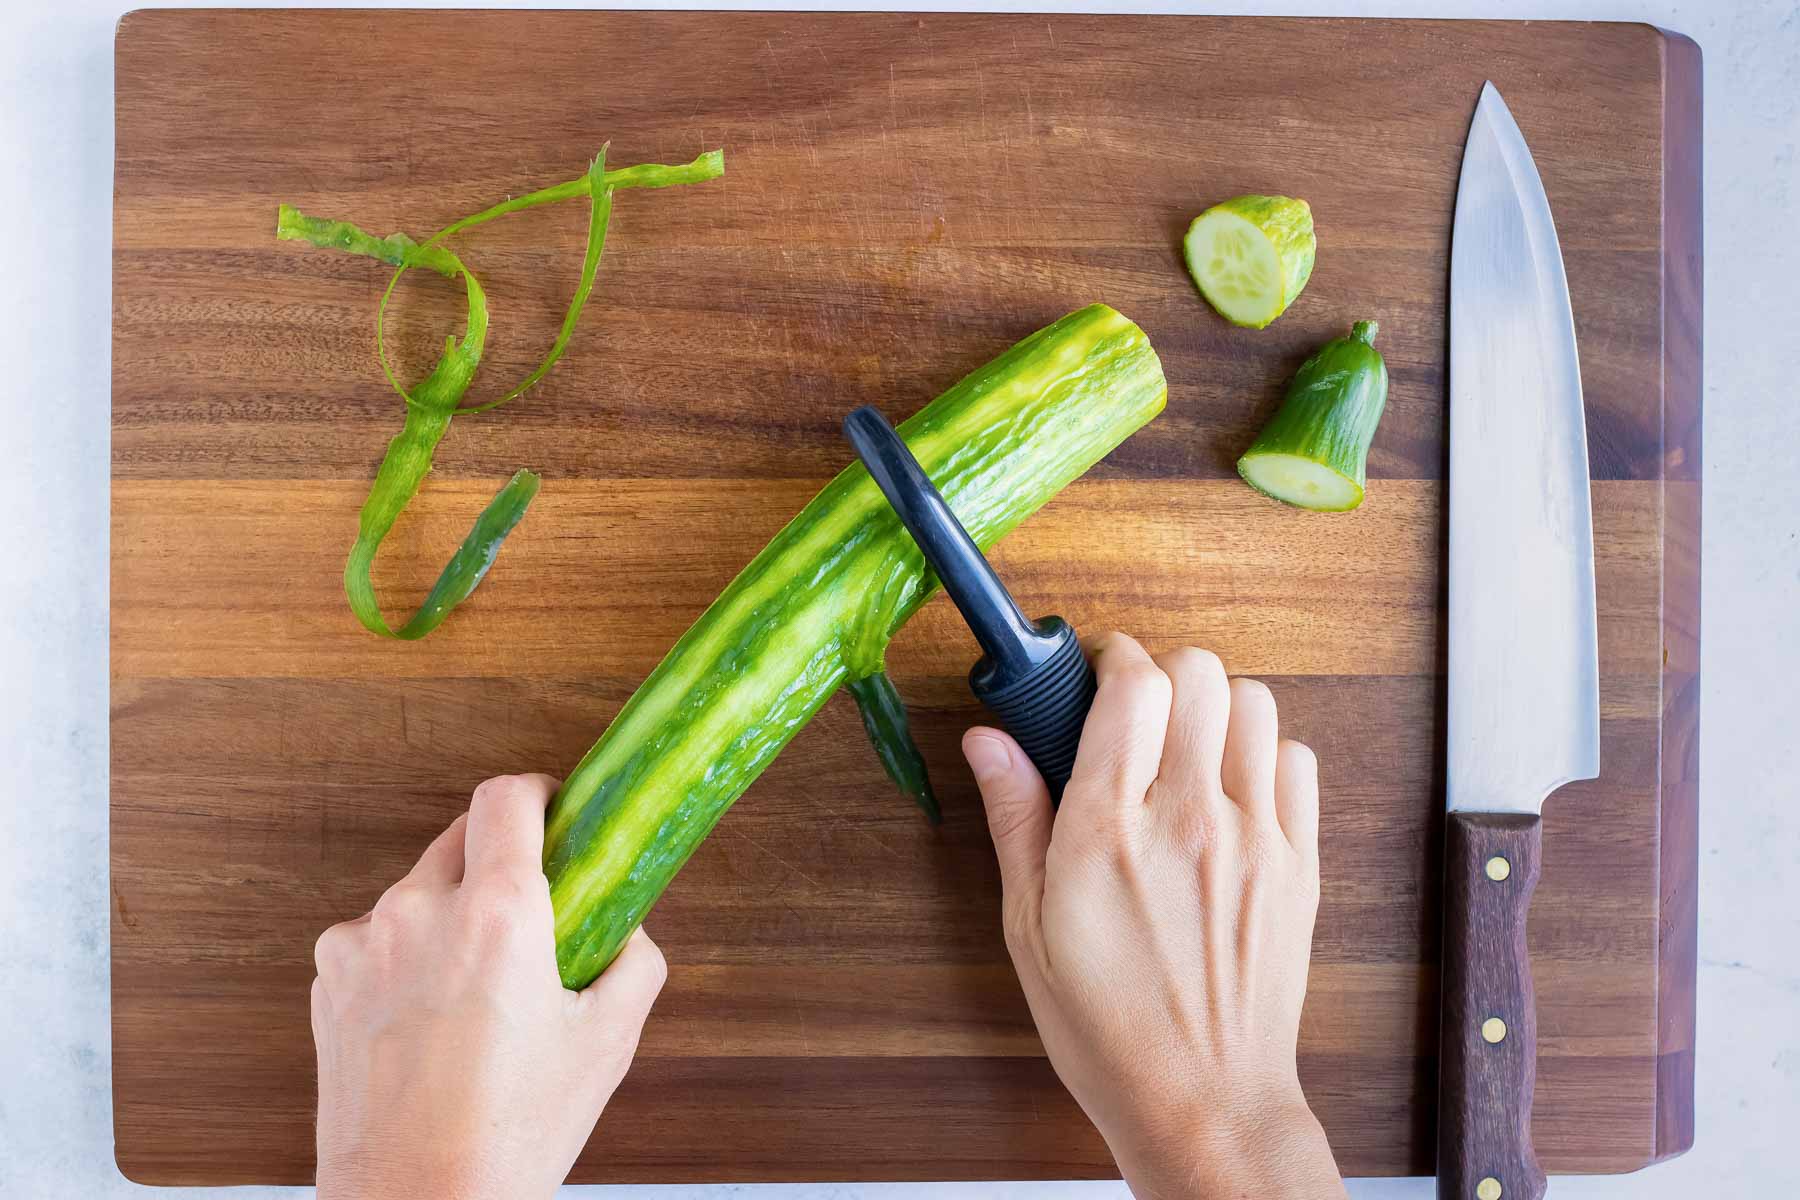 A cucumber is partially peeled before dicing.